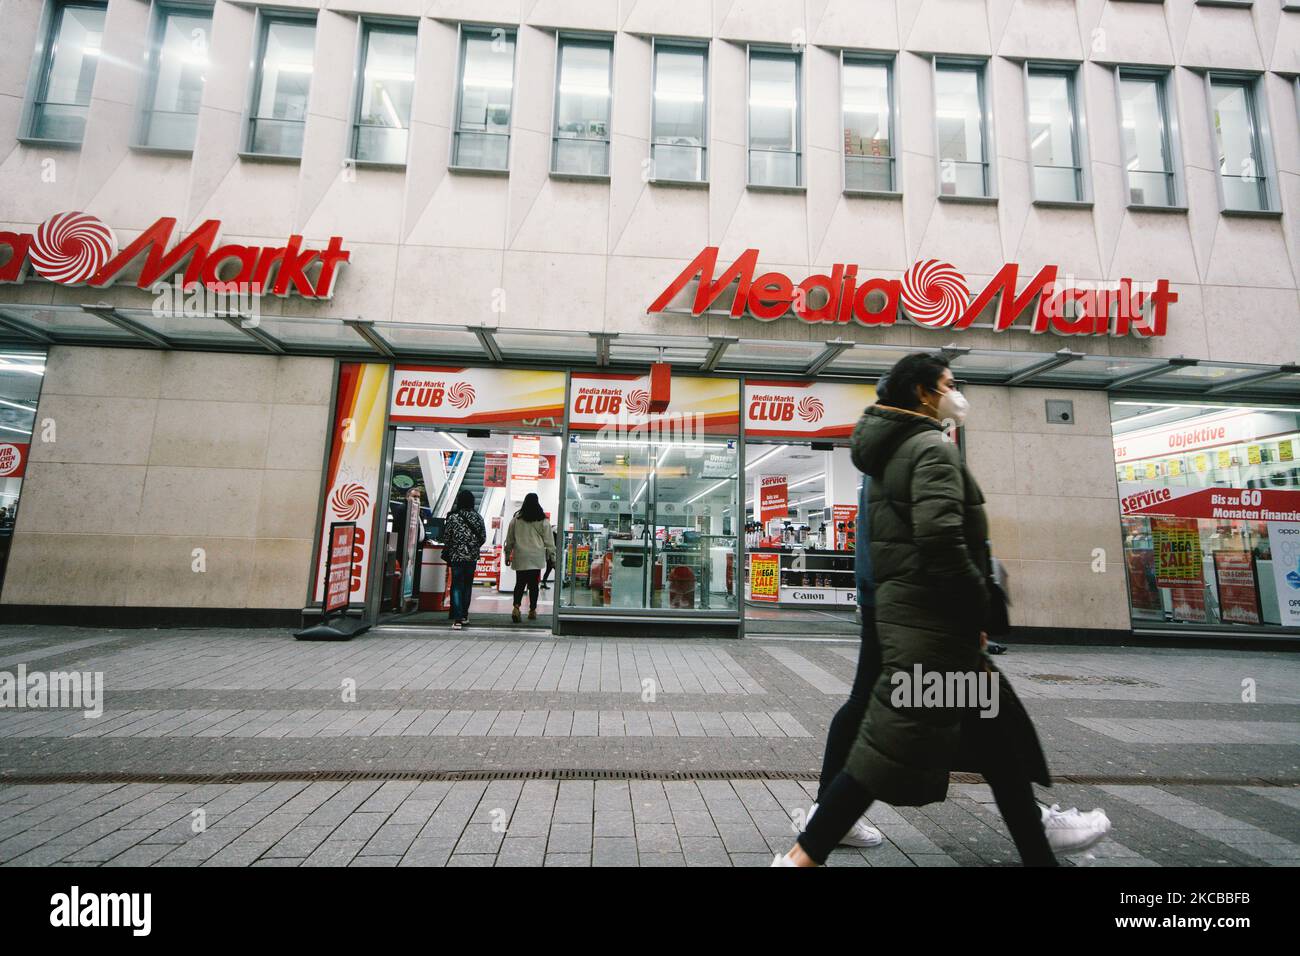 Media markt store stock photography and images - 3 Alamy